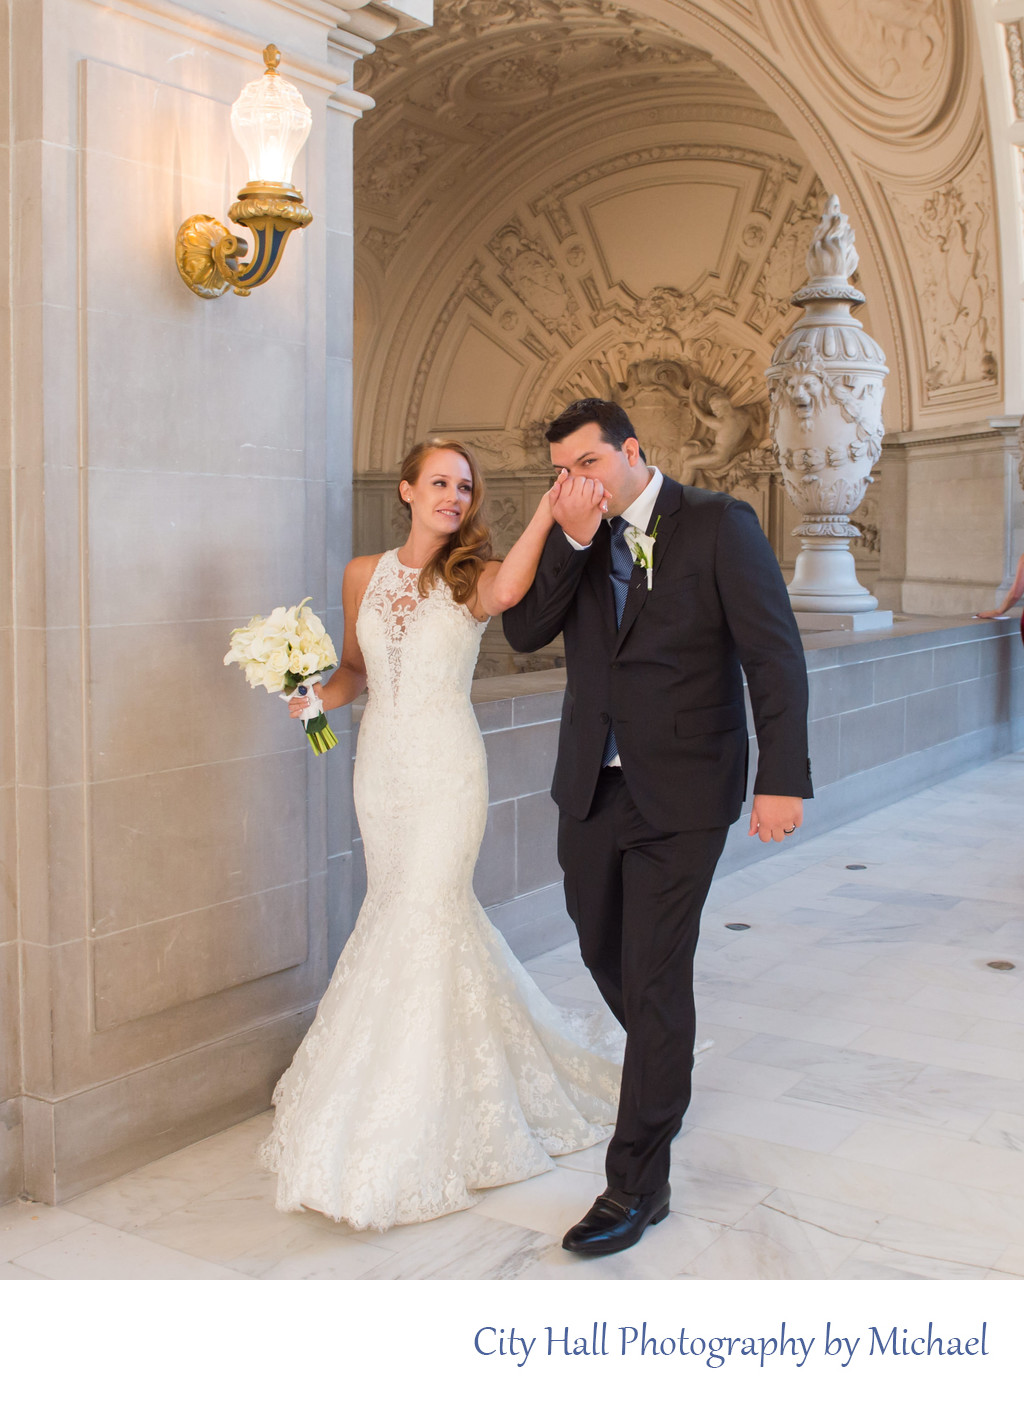 Candid photo of bride and groom after wedding ceremony at San Francisco city hall